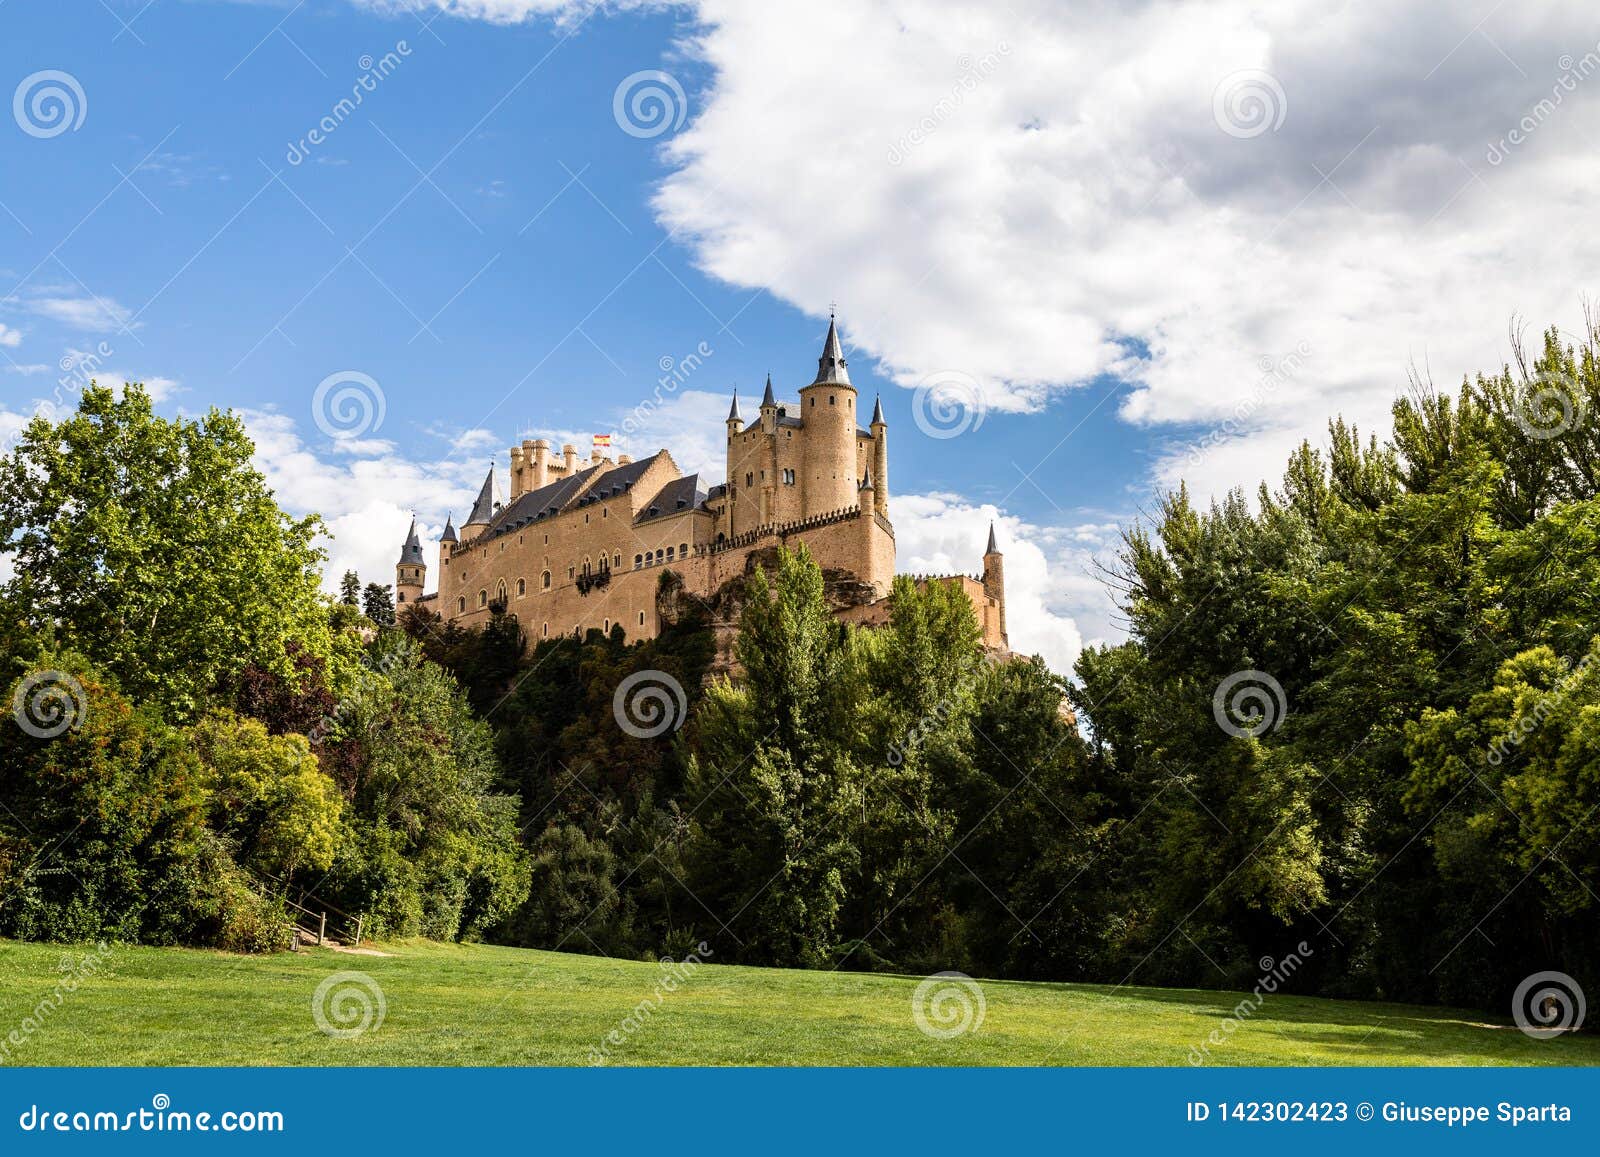 the famous view of the alcazar of segovia in a sunny summer day from the view point of la pradera de san marcos, segovia, spain